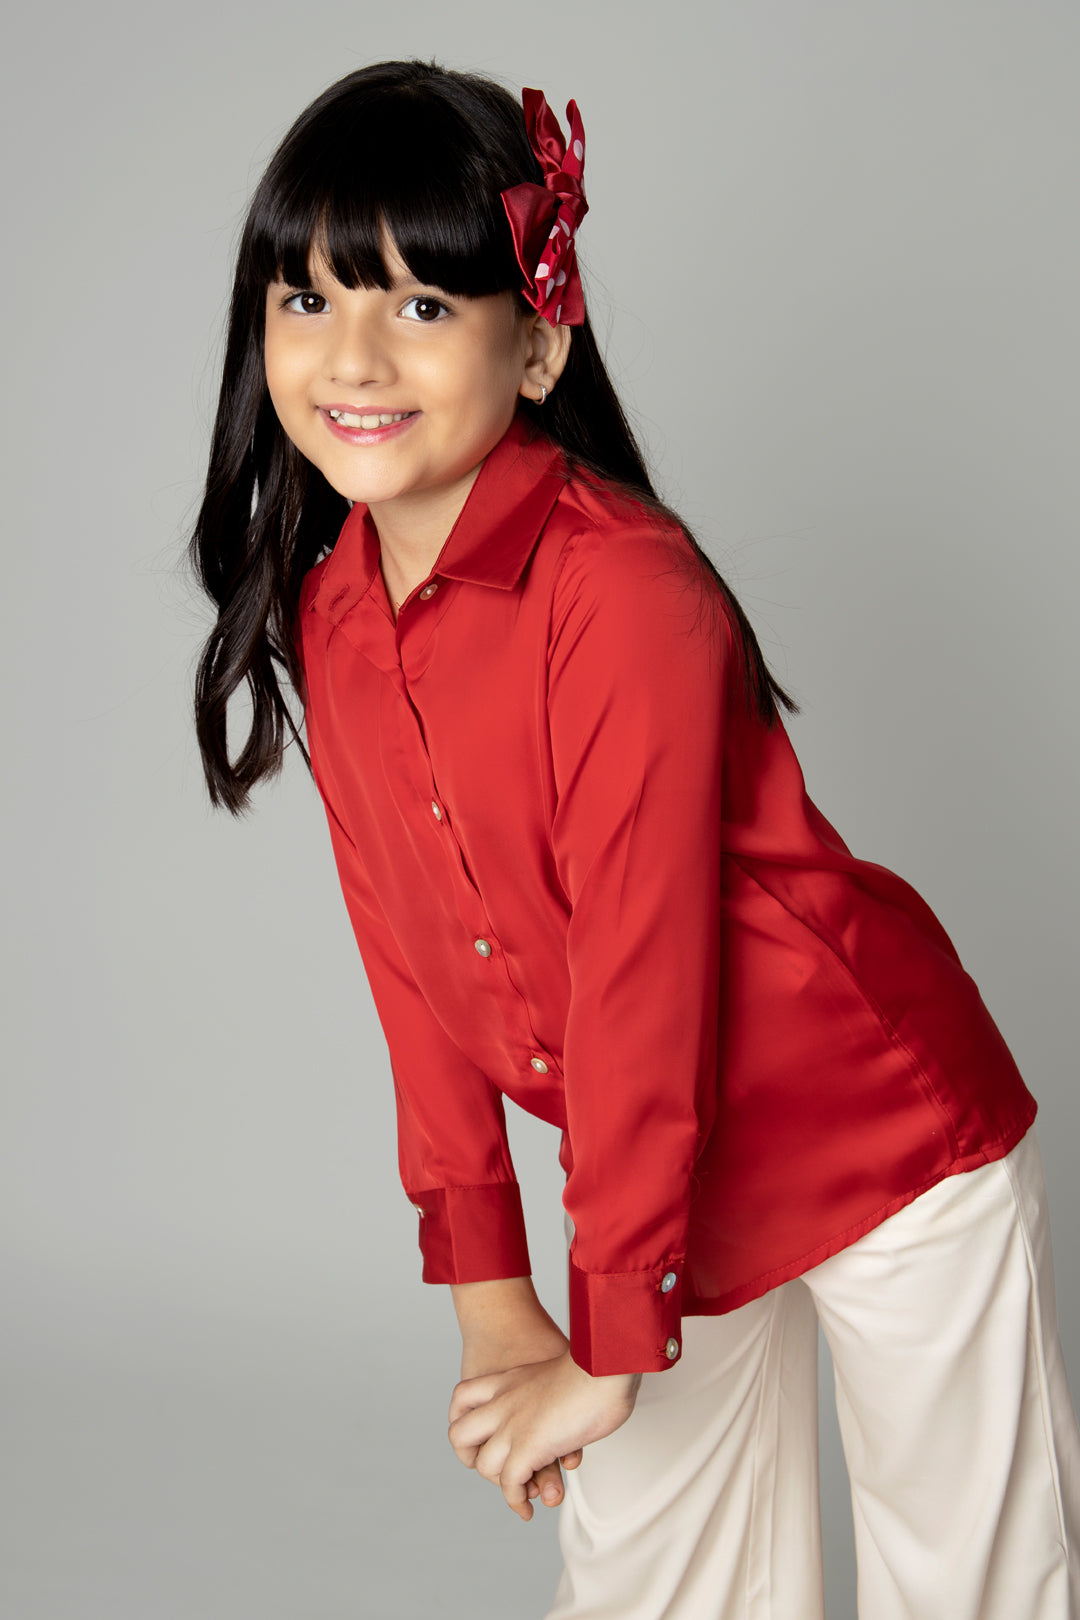 Plain Red Spread Collar Casual Shirt For Girls